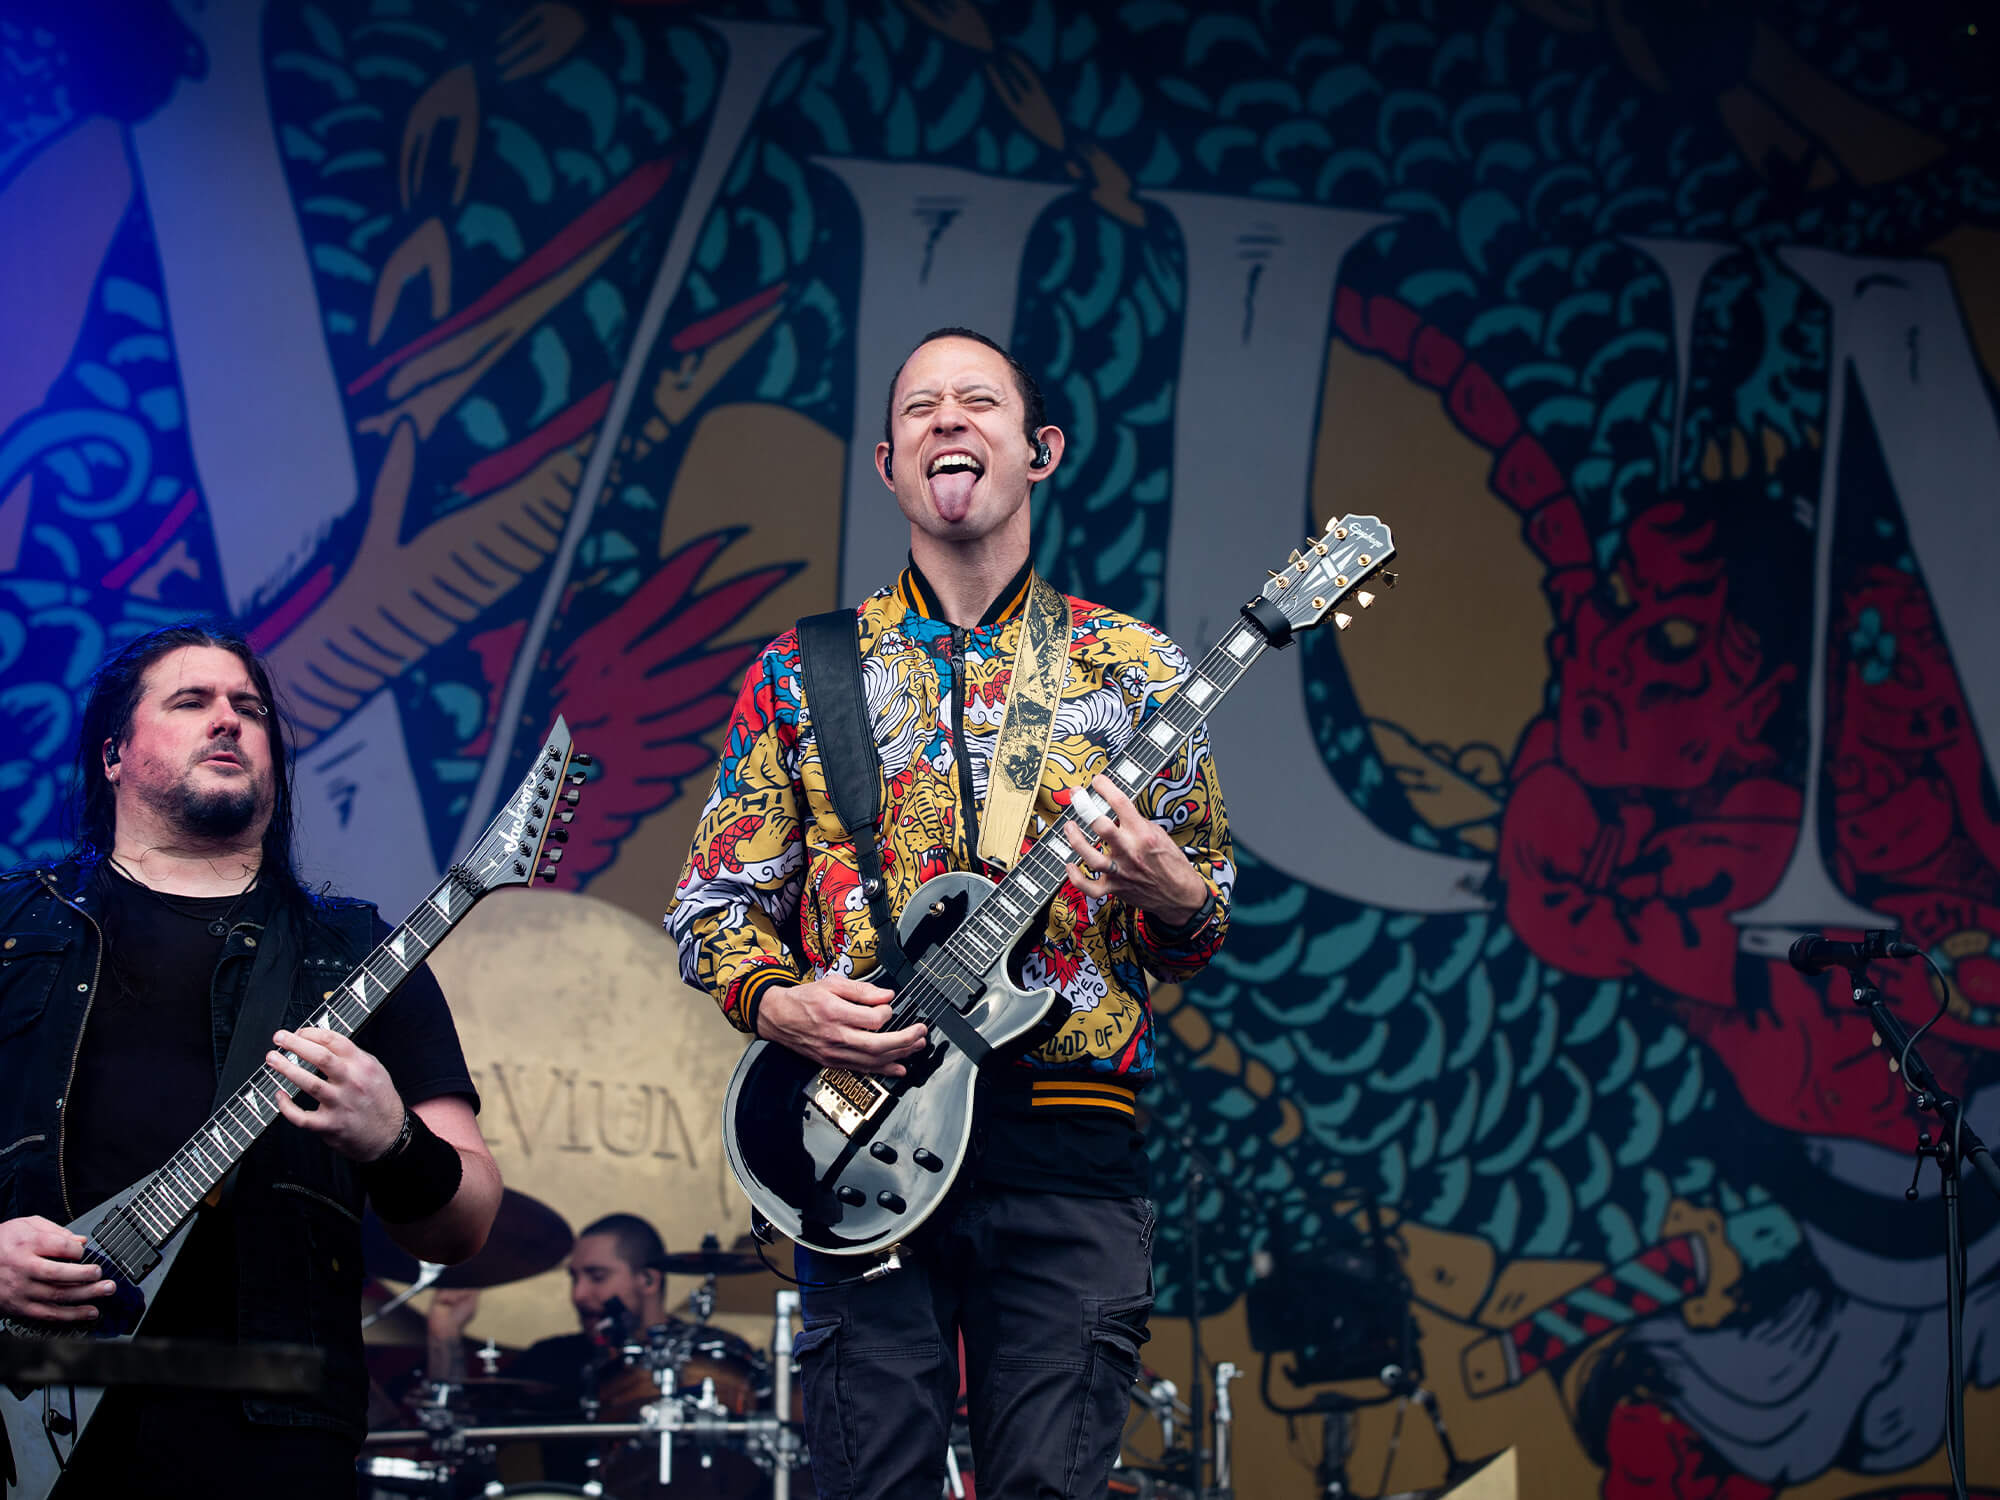 Matt Heafy on stage in 2023, he's playing guitar and sticking his tongue out at the crowd.